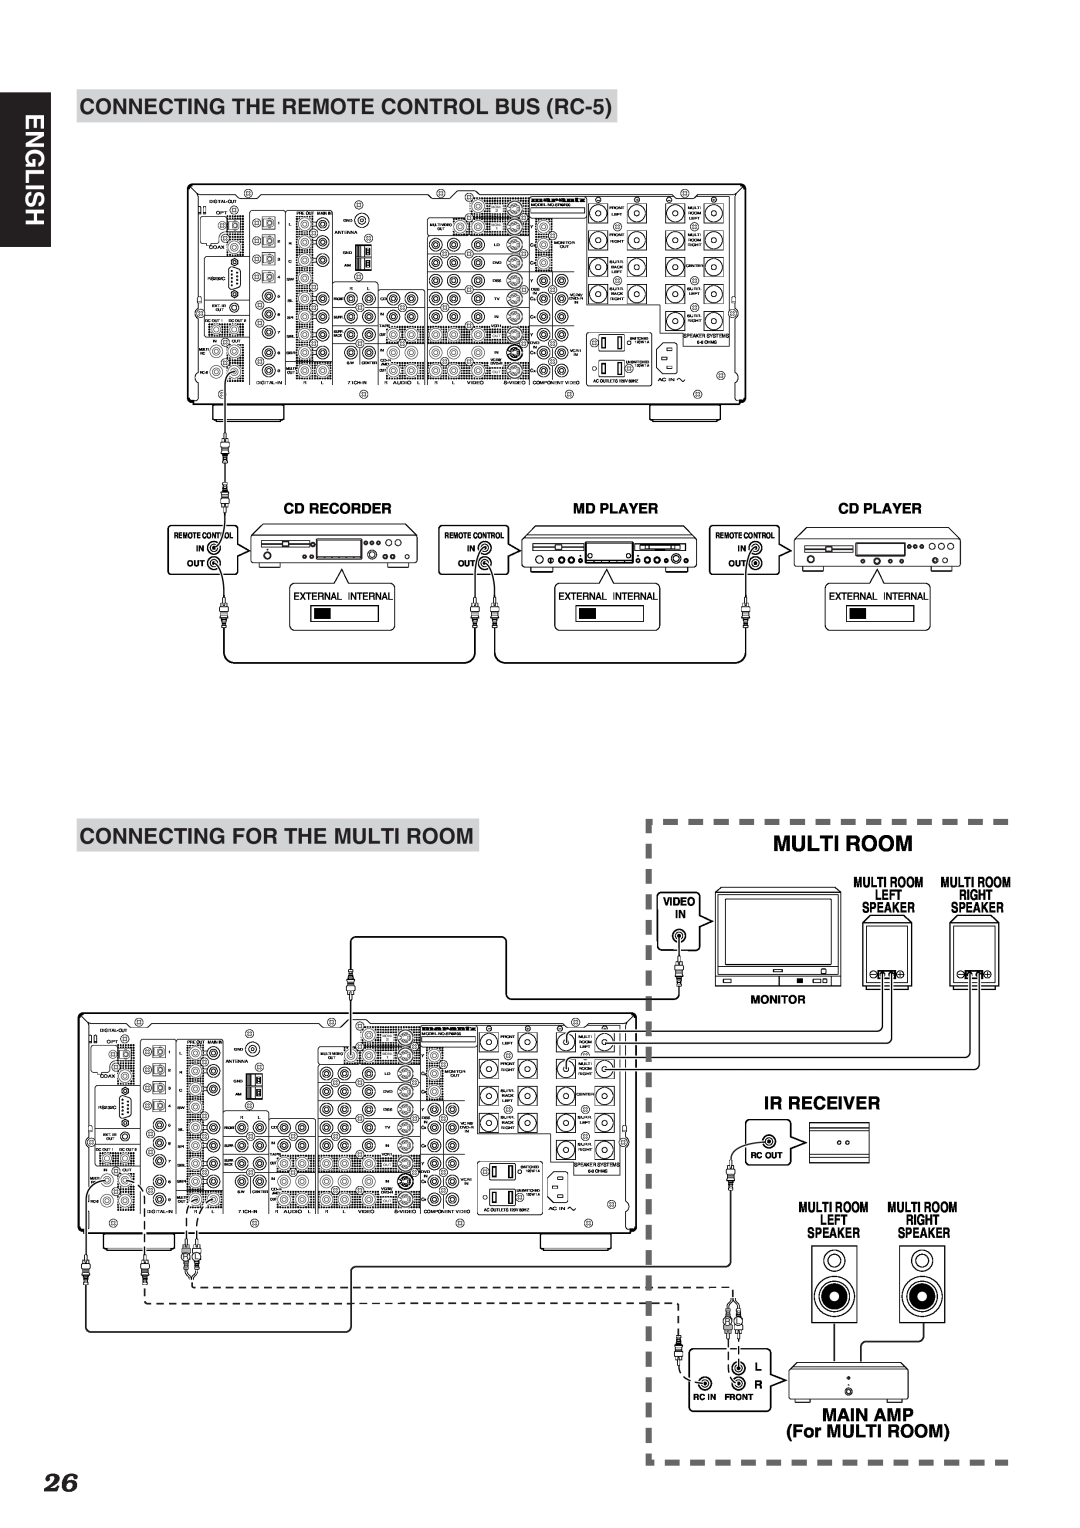 Marantz SR9200 manual CONNECTING THE REMOTE CONTROL BUS RC-5, Connecting For The Multi Room, English, Ir Receiver, Main Amp 